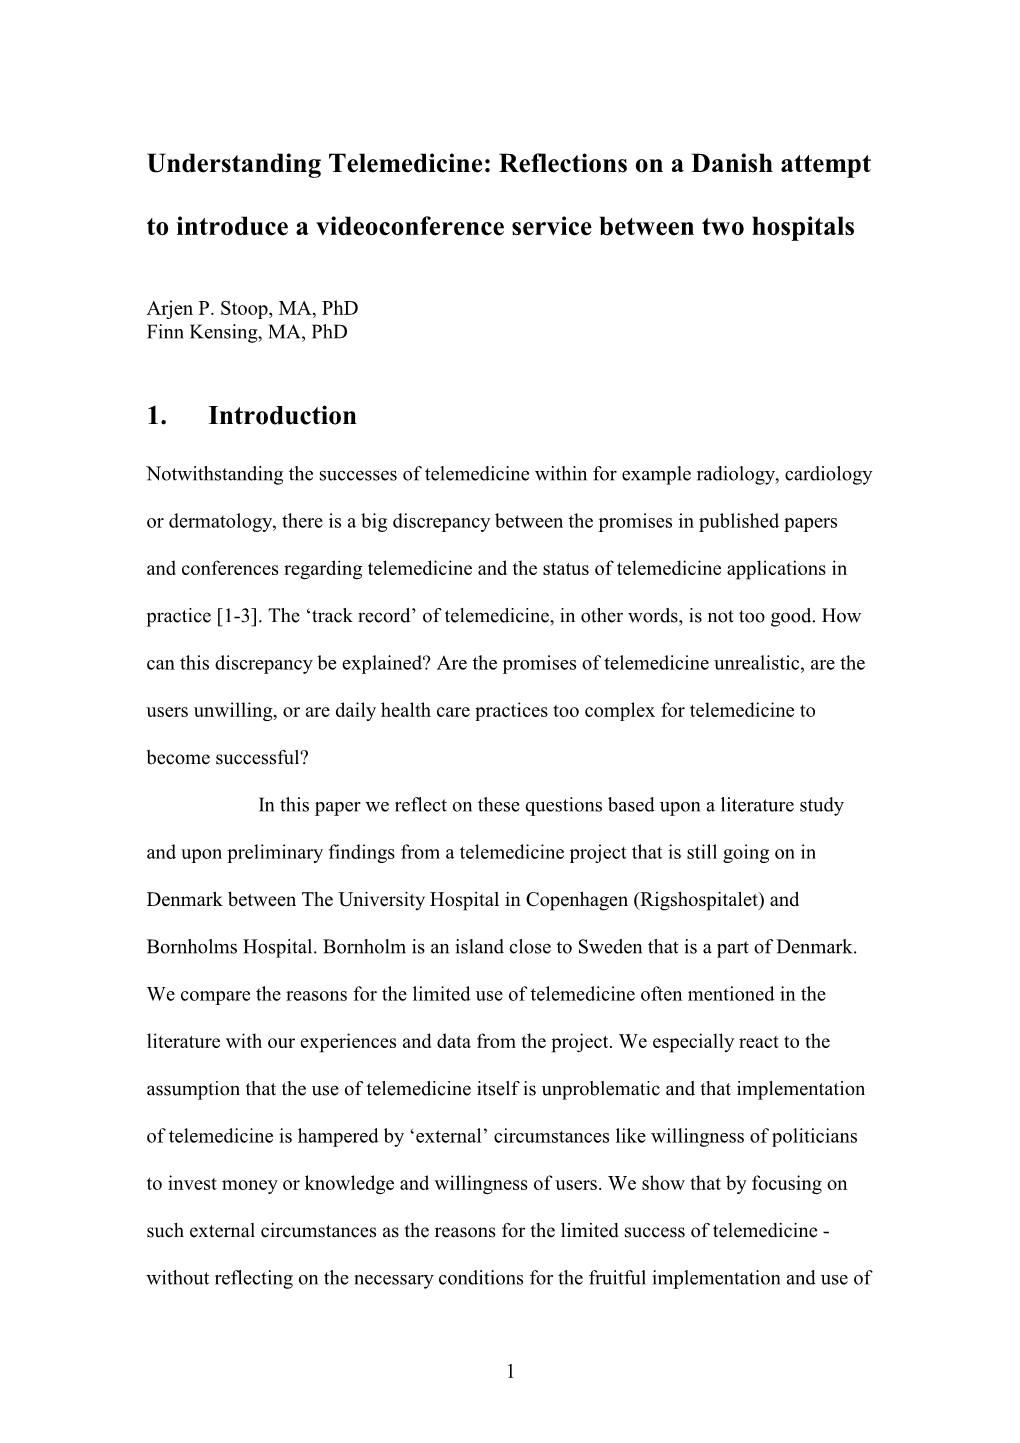 Understanding Telemedicine: Reflections on a Danish Attempt to Introduce a Videoconference Service Between Two Hospitals